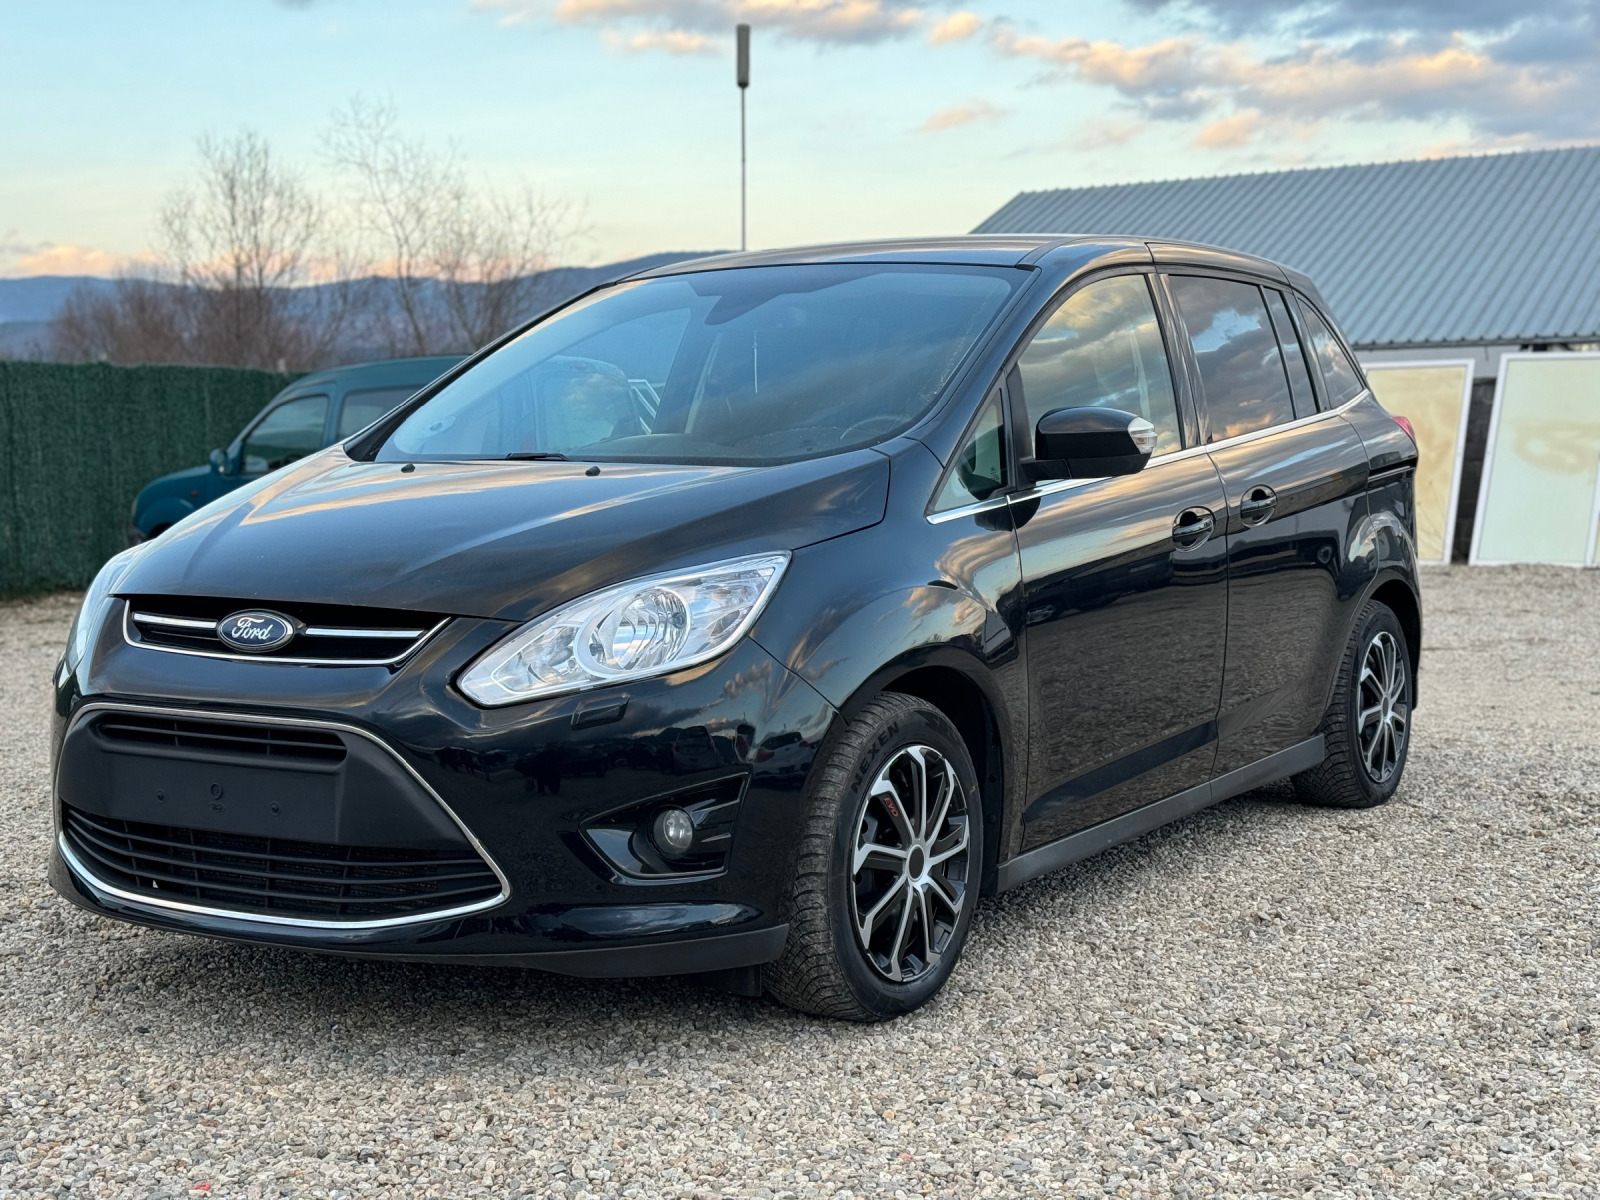 Ford Grand C-Max 2.0tdci Automatic 140hp - [1] 